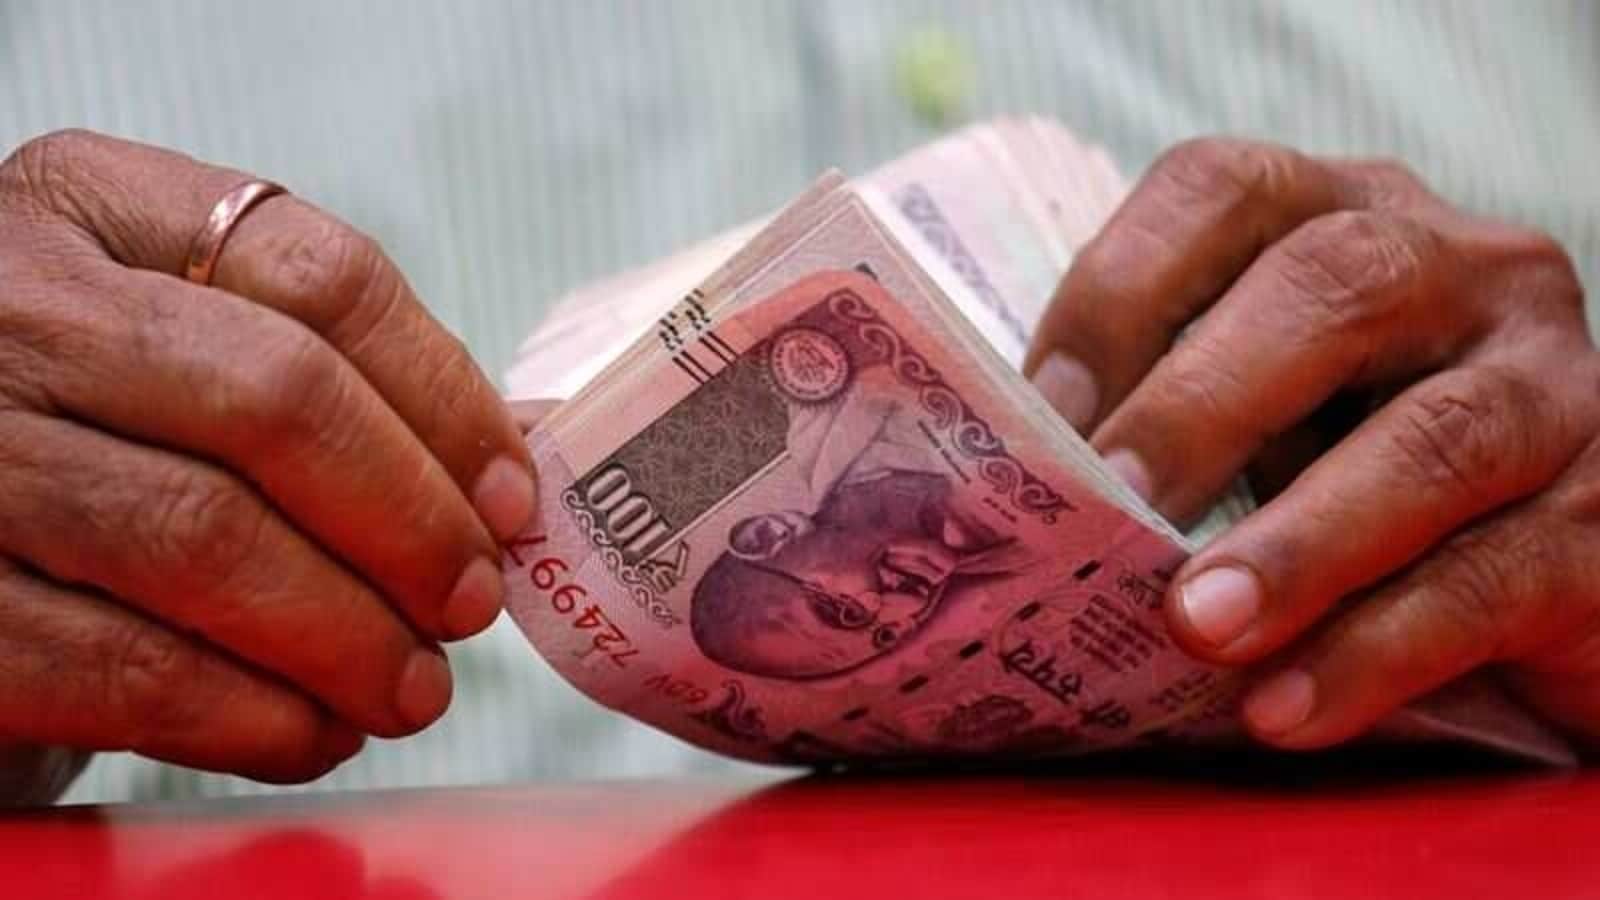 No individual can own more than one PPF account: Govt